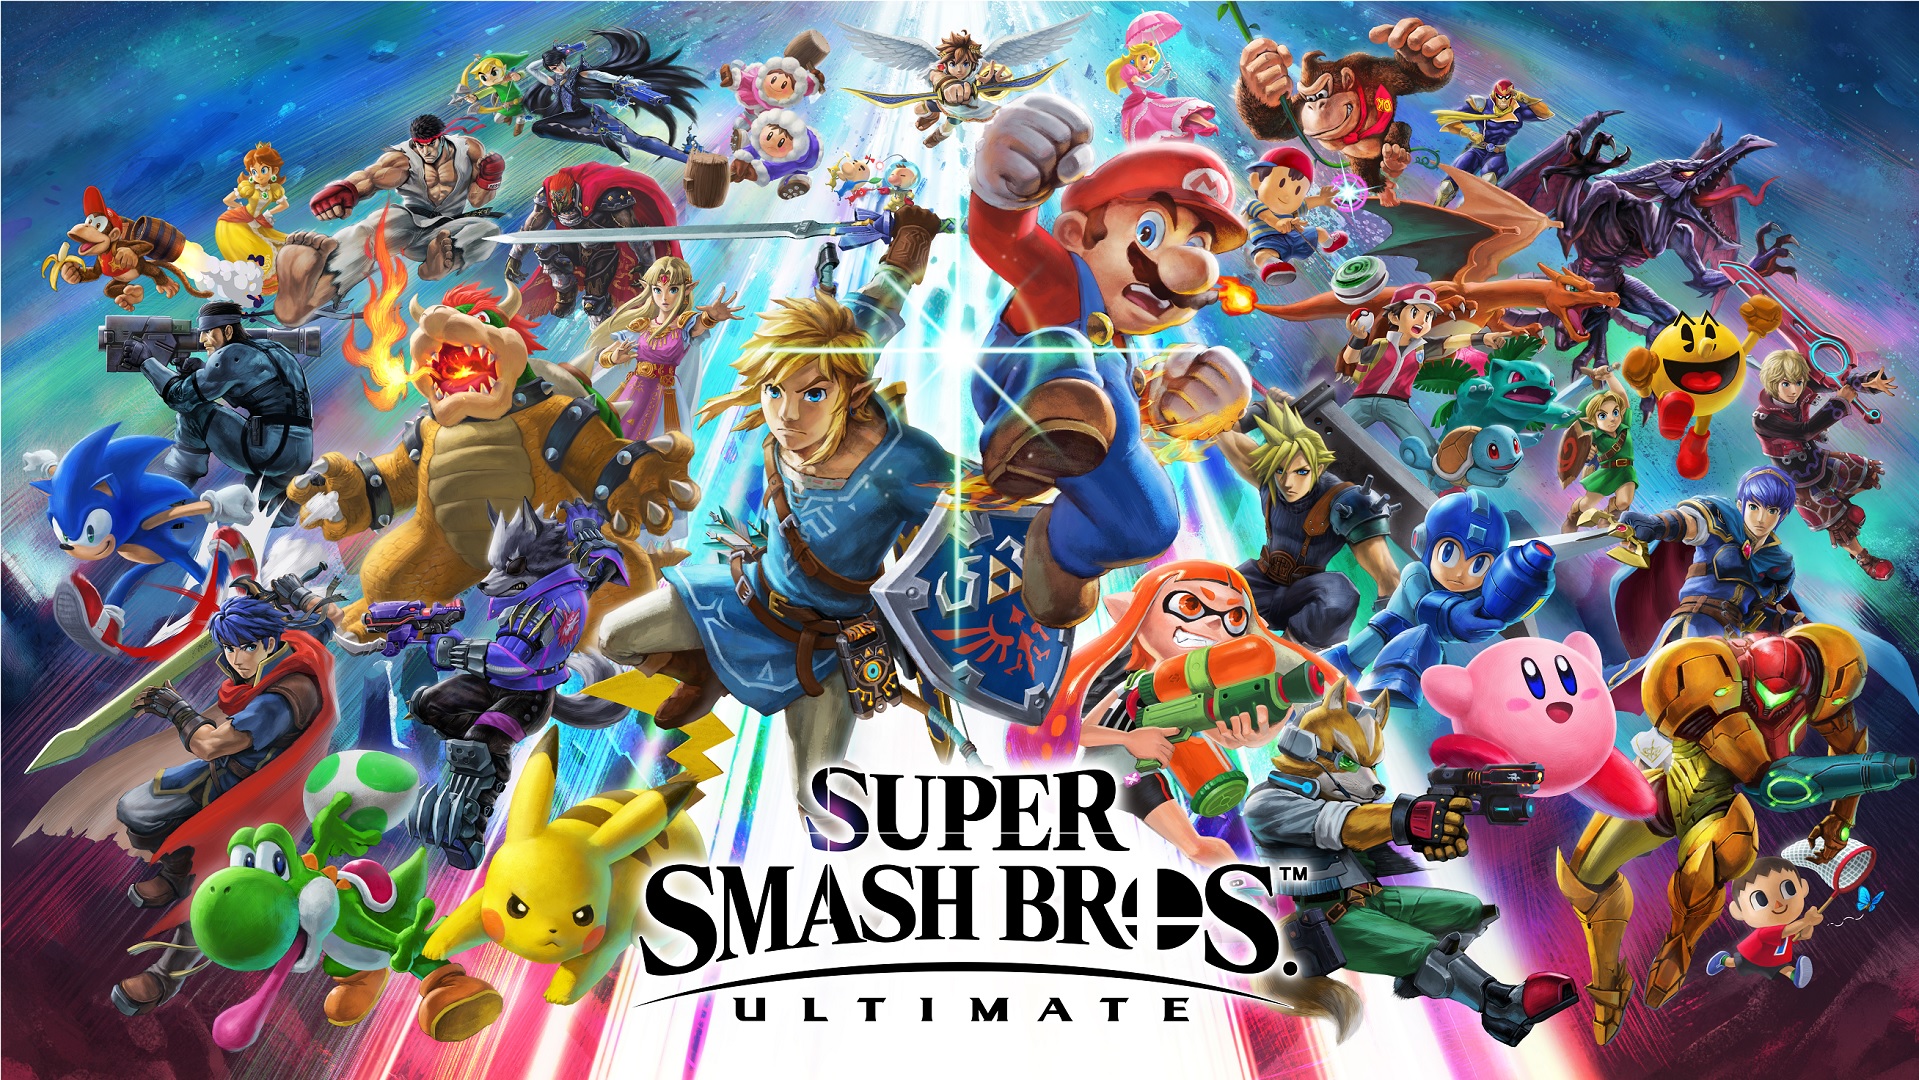 Super Smash Bros. Ultimate Announced for Switch, has Every Previous Character, Launches December 7